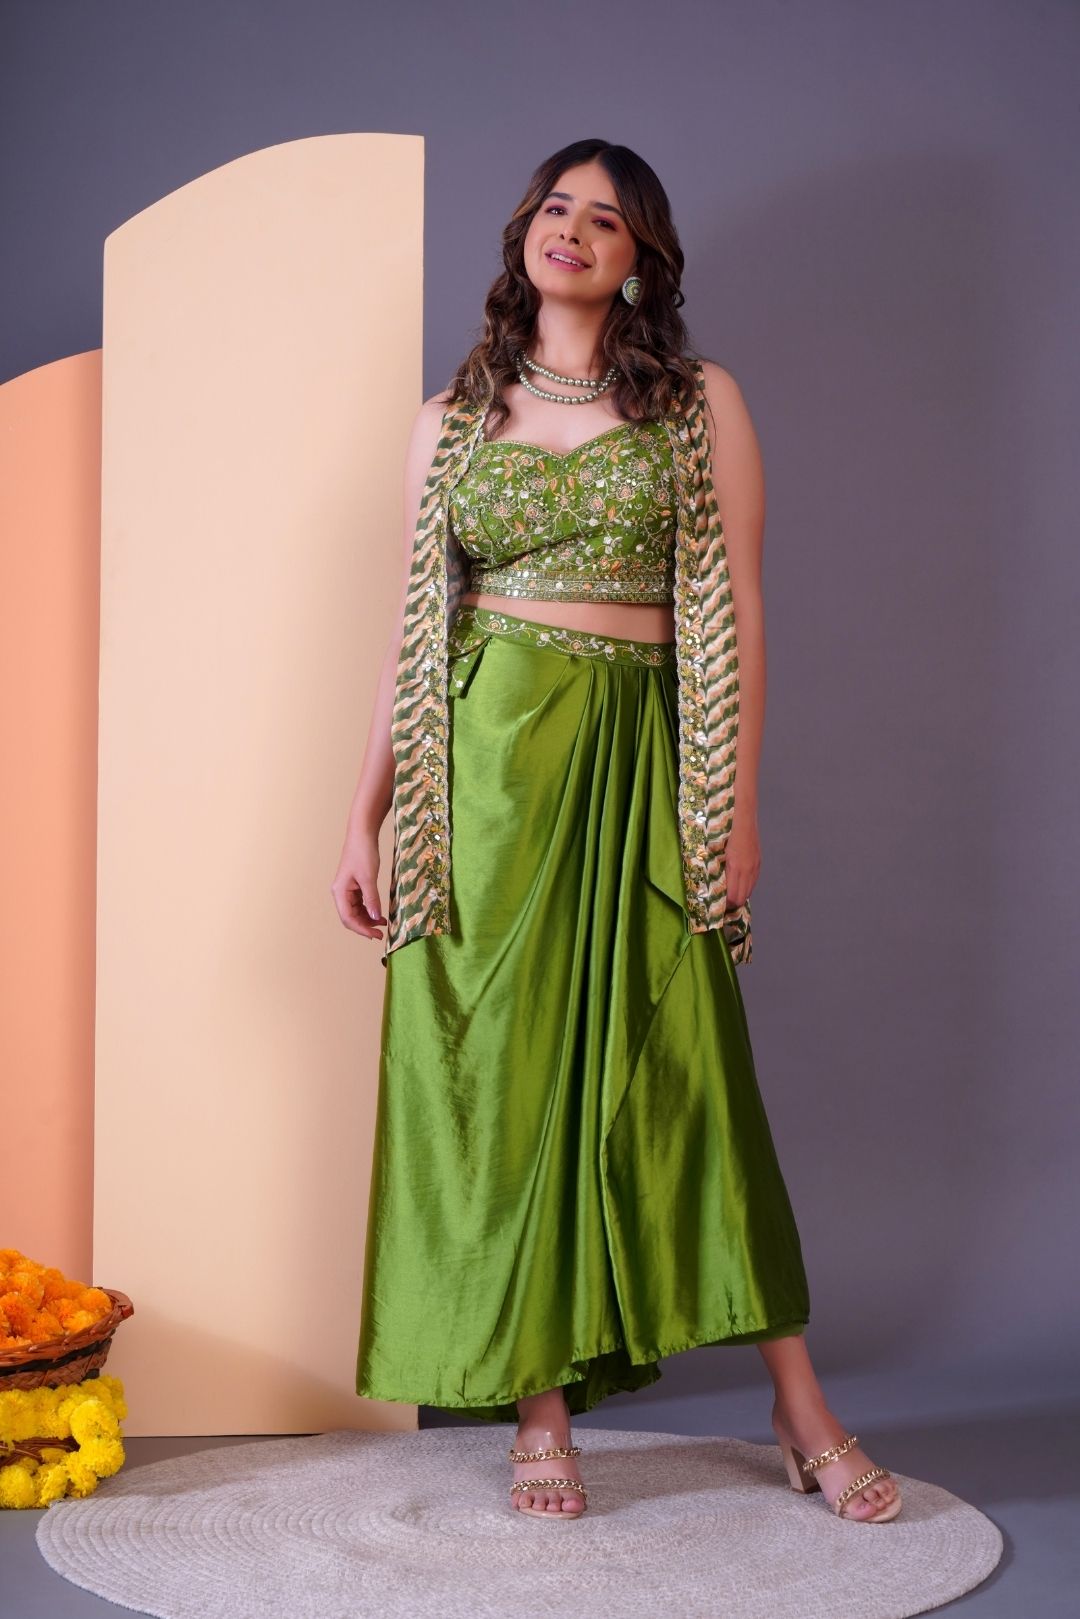 Green Embroidered Dhoti Style Skirt With Top And Short Shrug